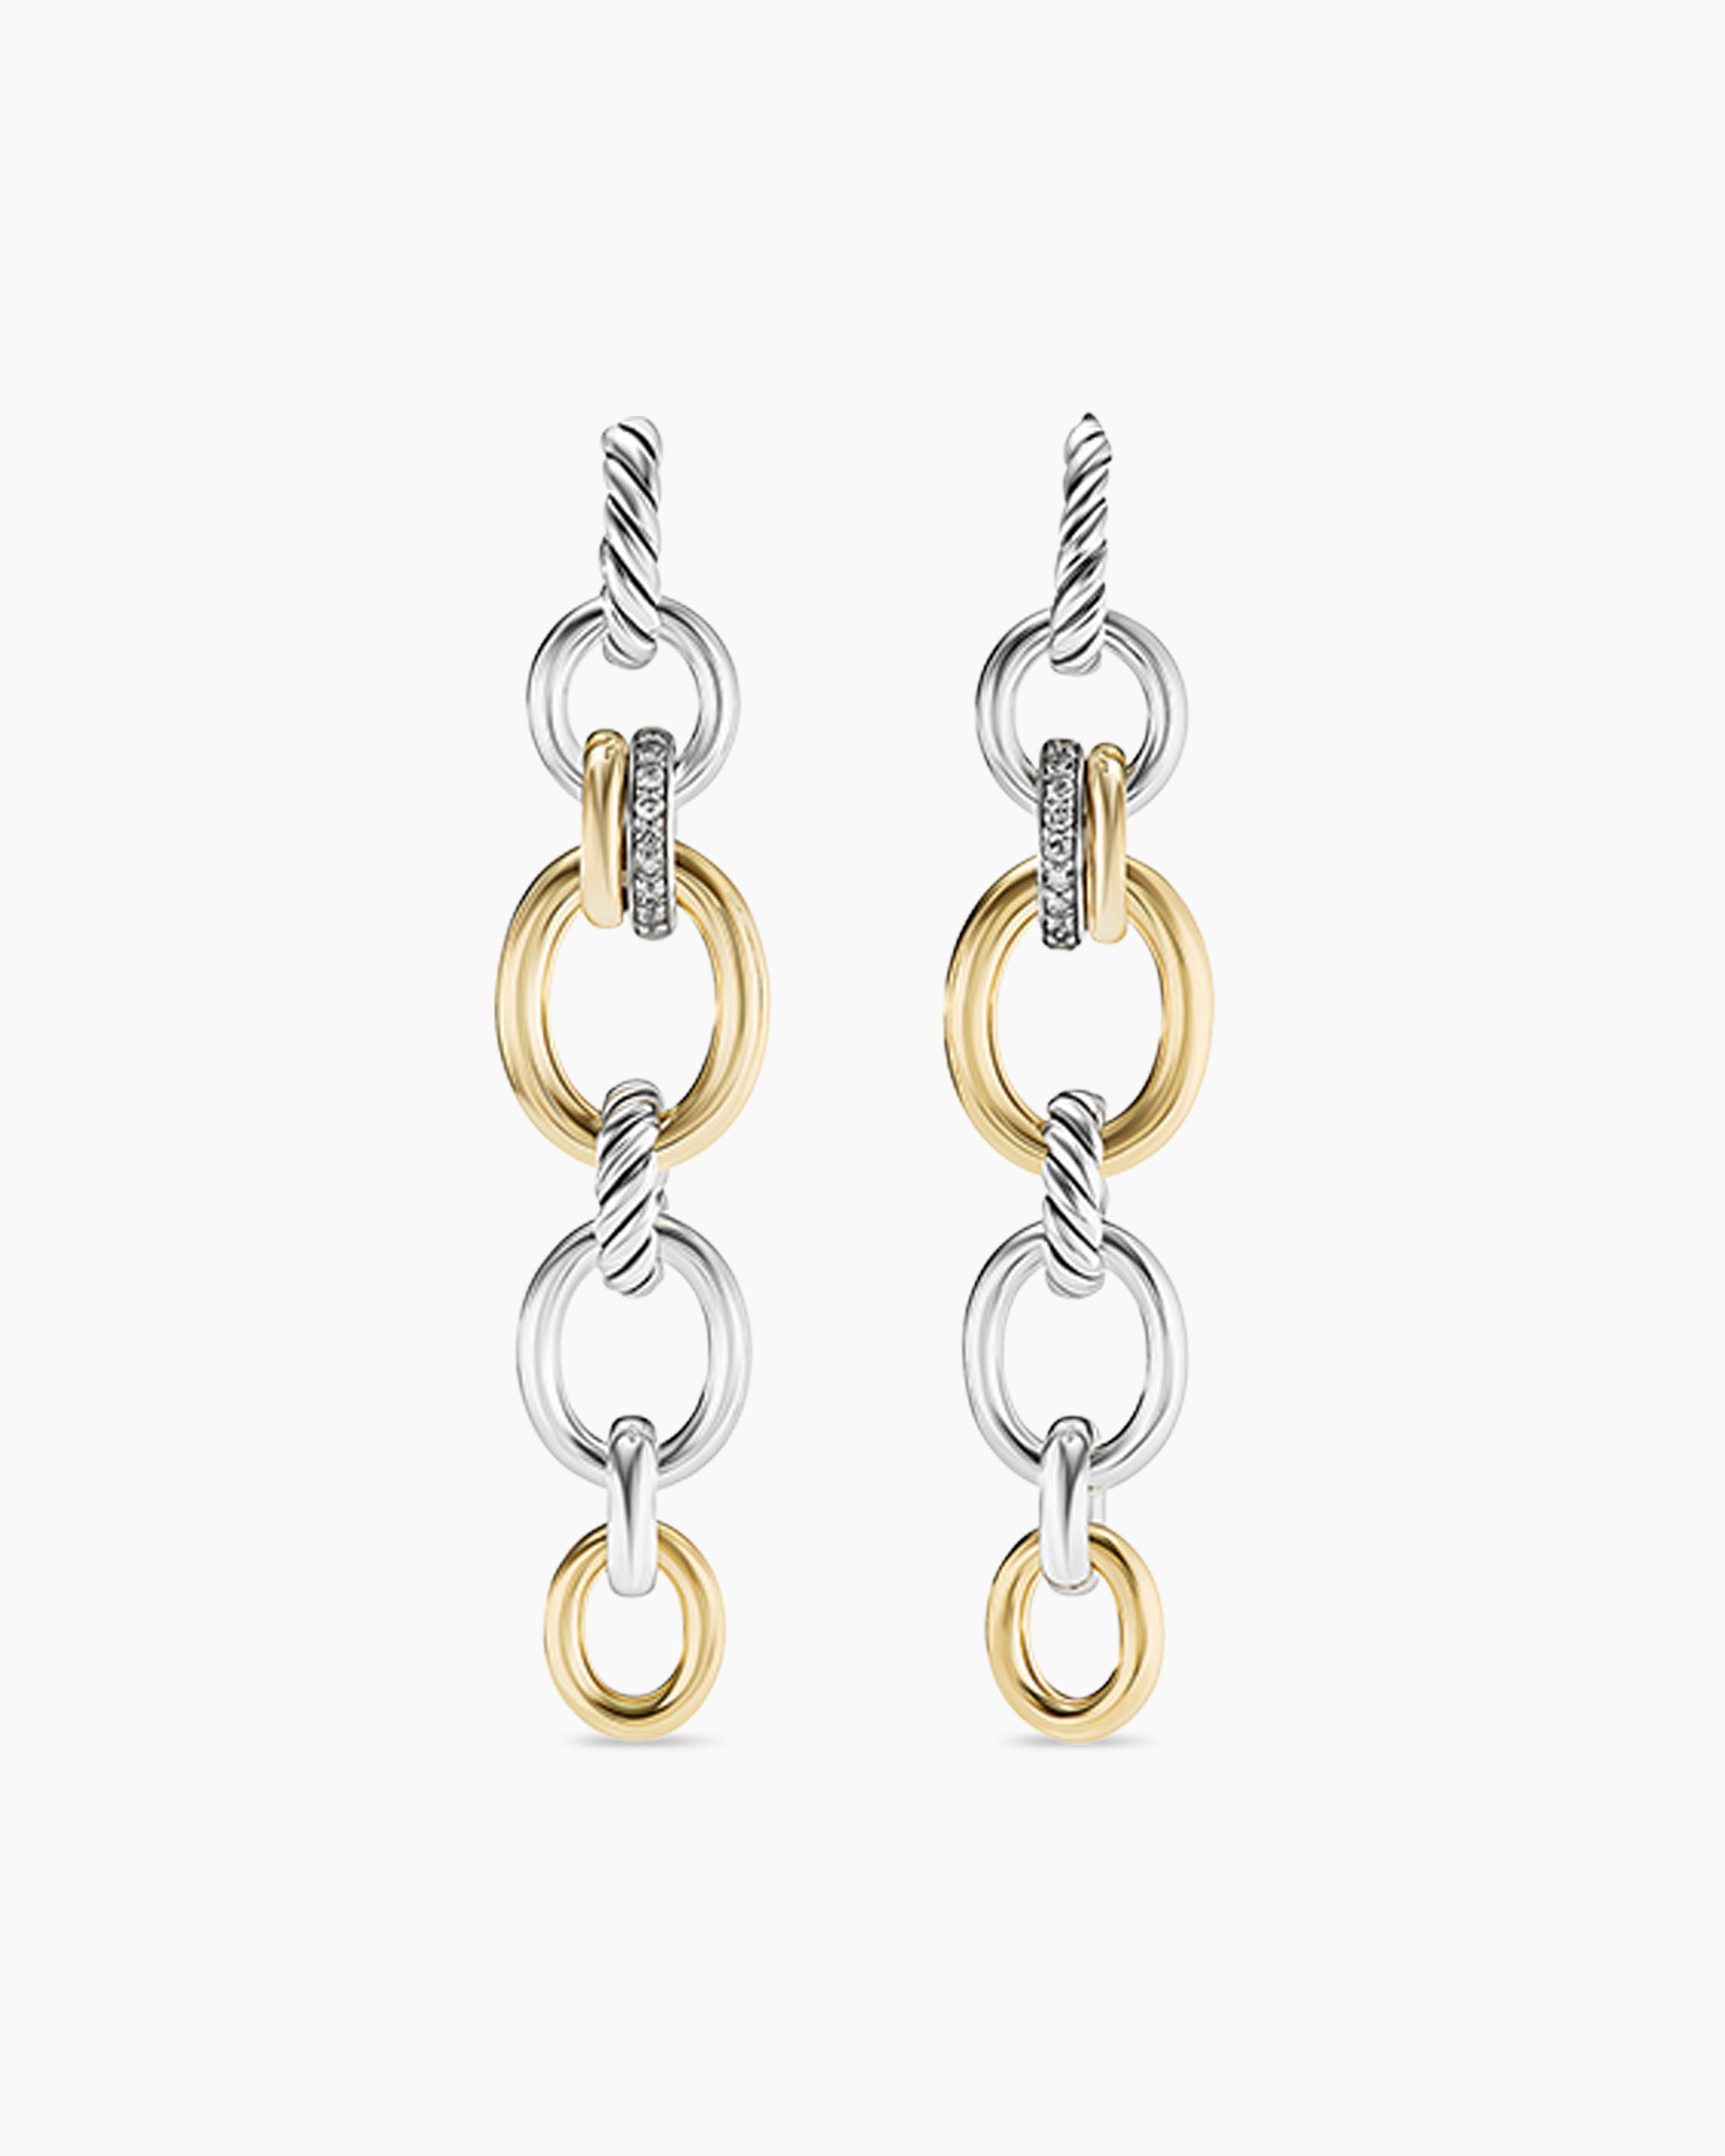 Women's Signature Brand Earrings in Sterling Silver with Gold Plated | Odda75